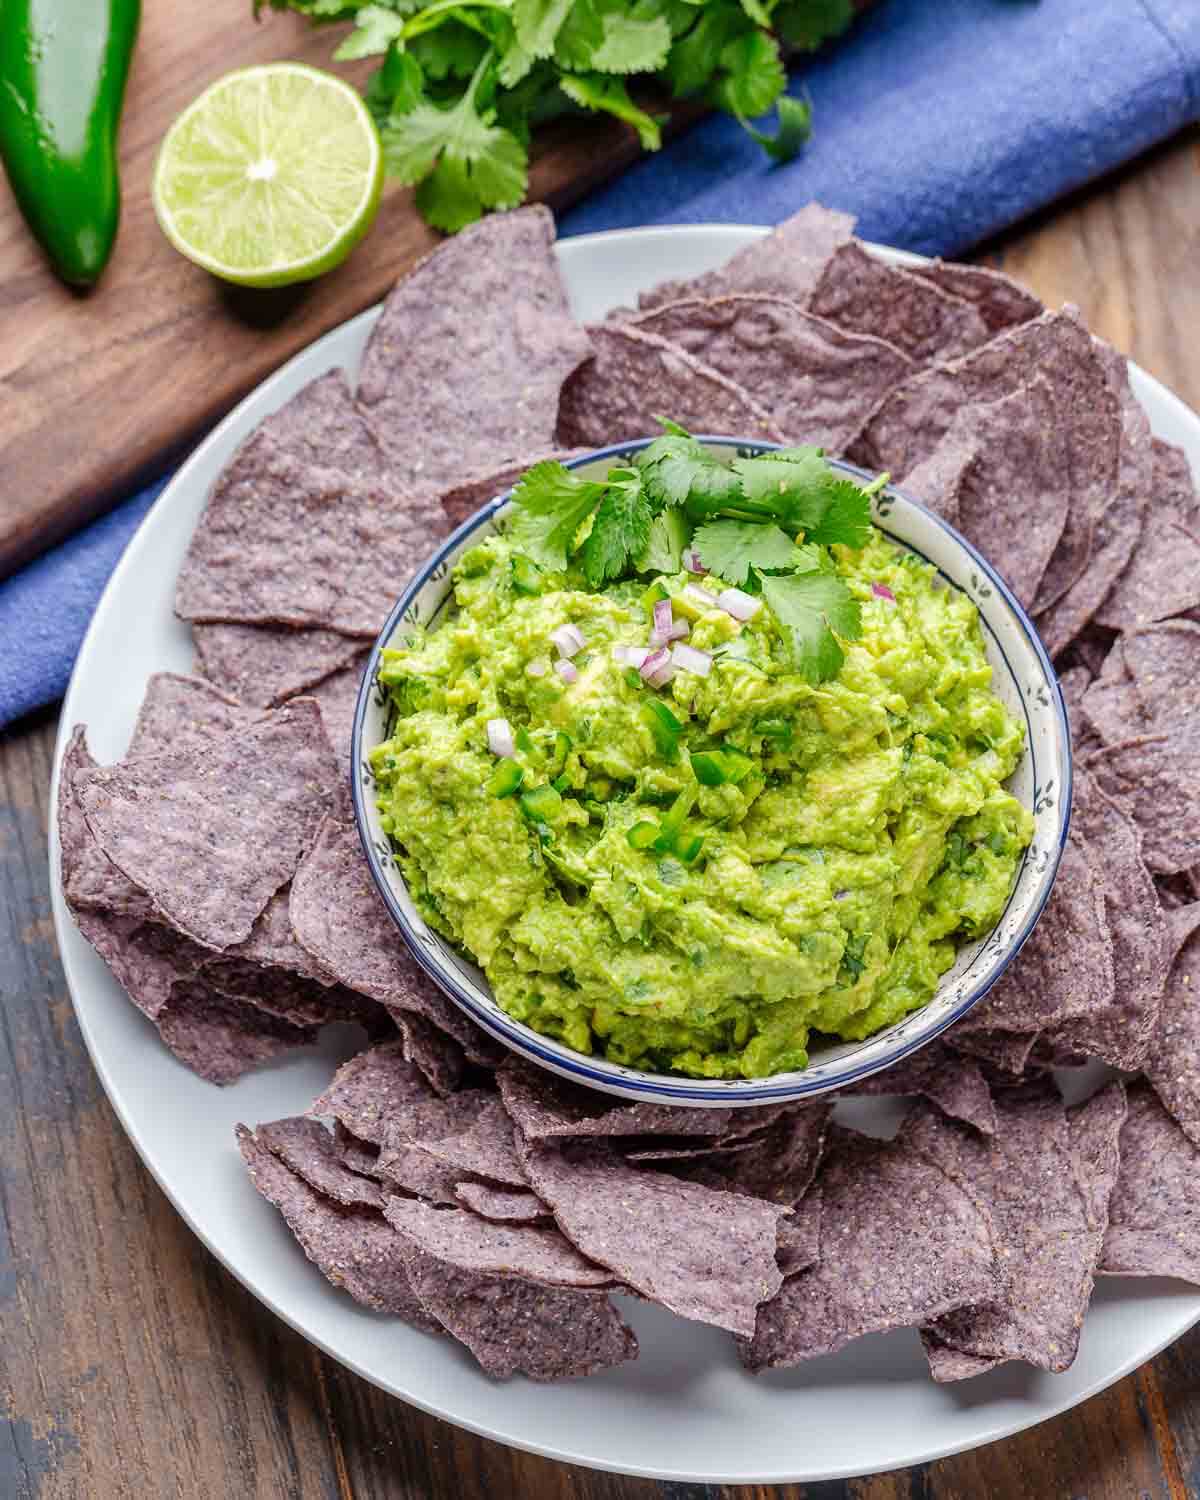 Large platter with bowl of guacamole and tortilla chips.